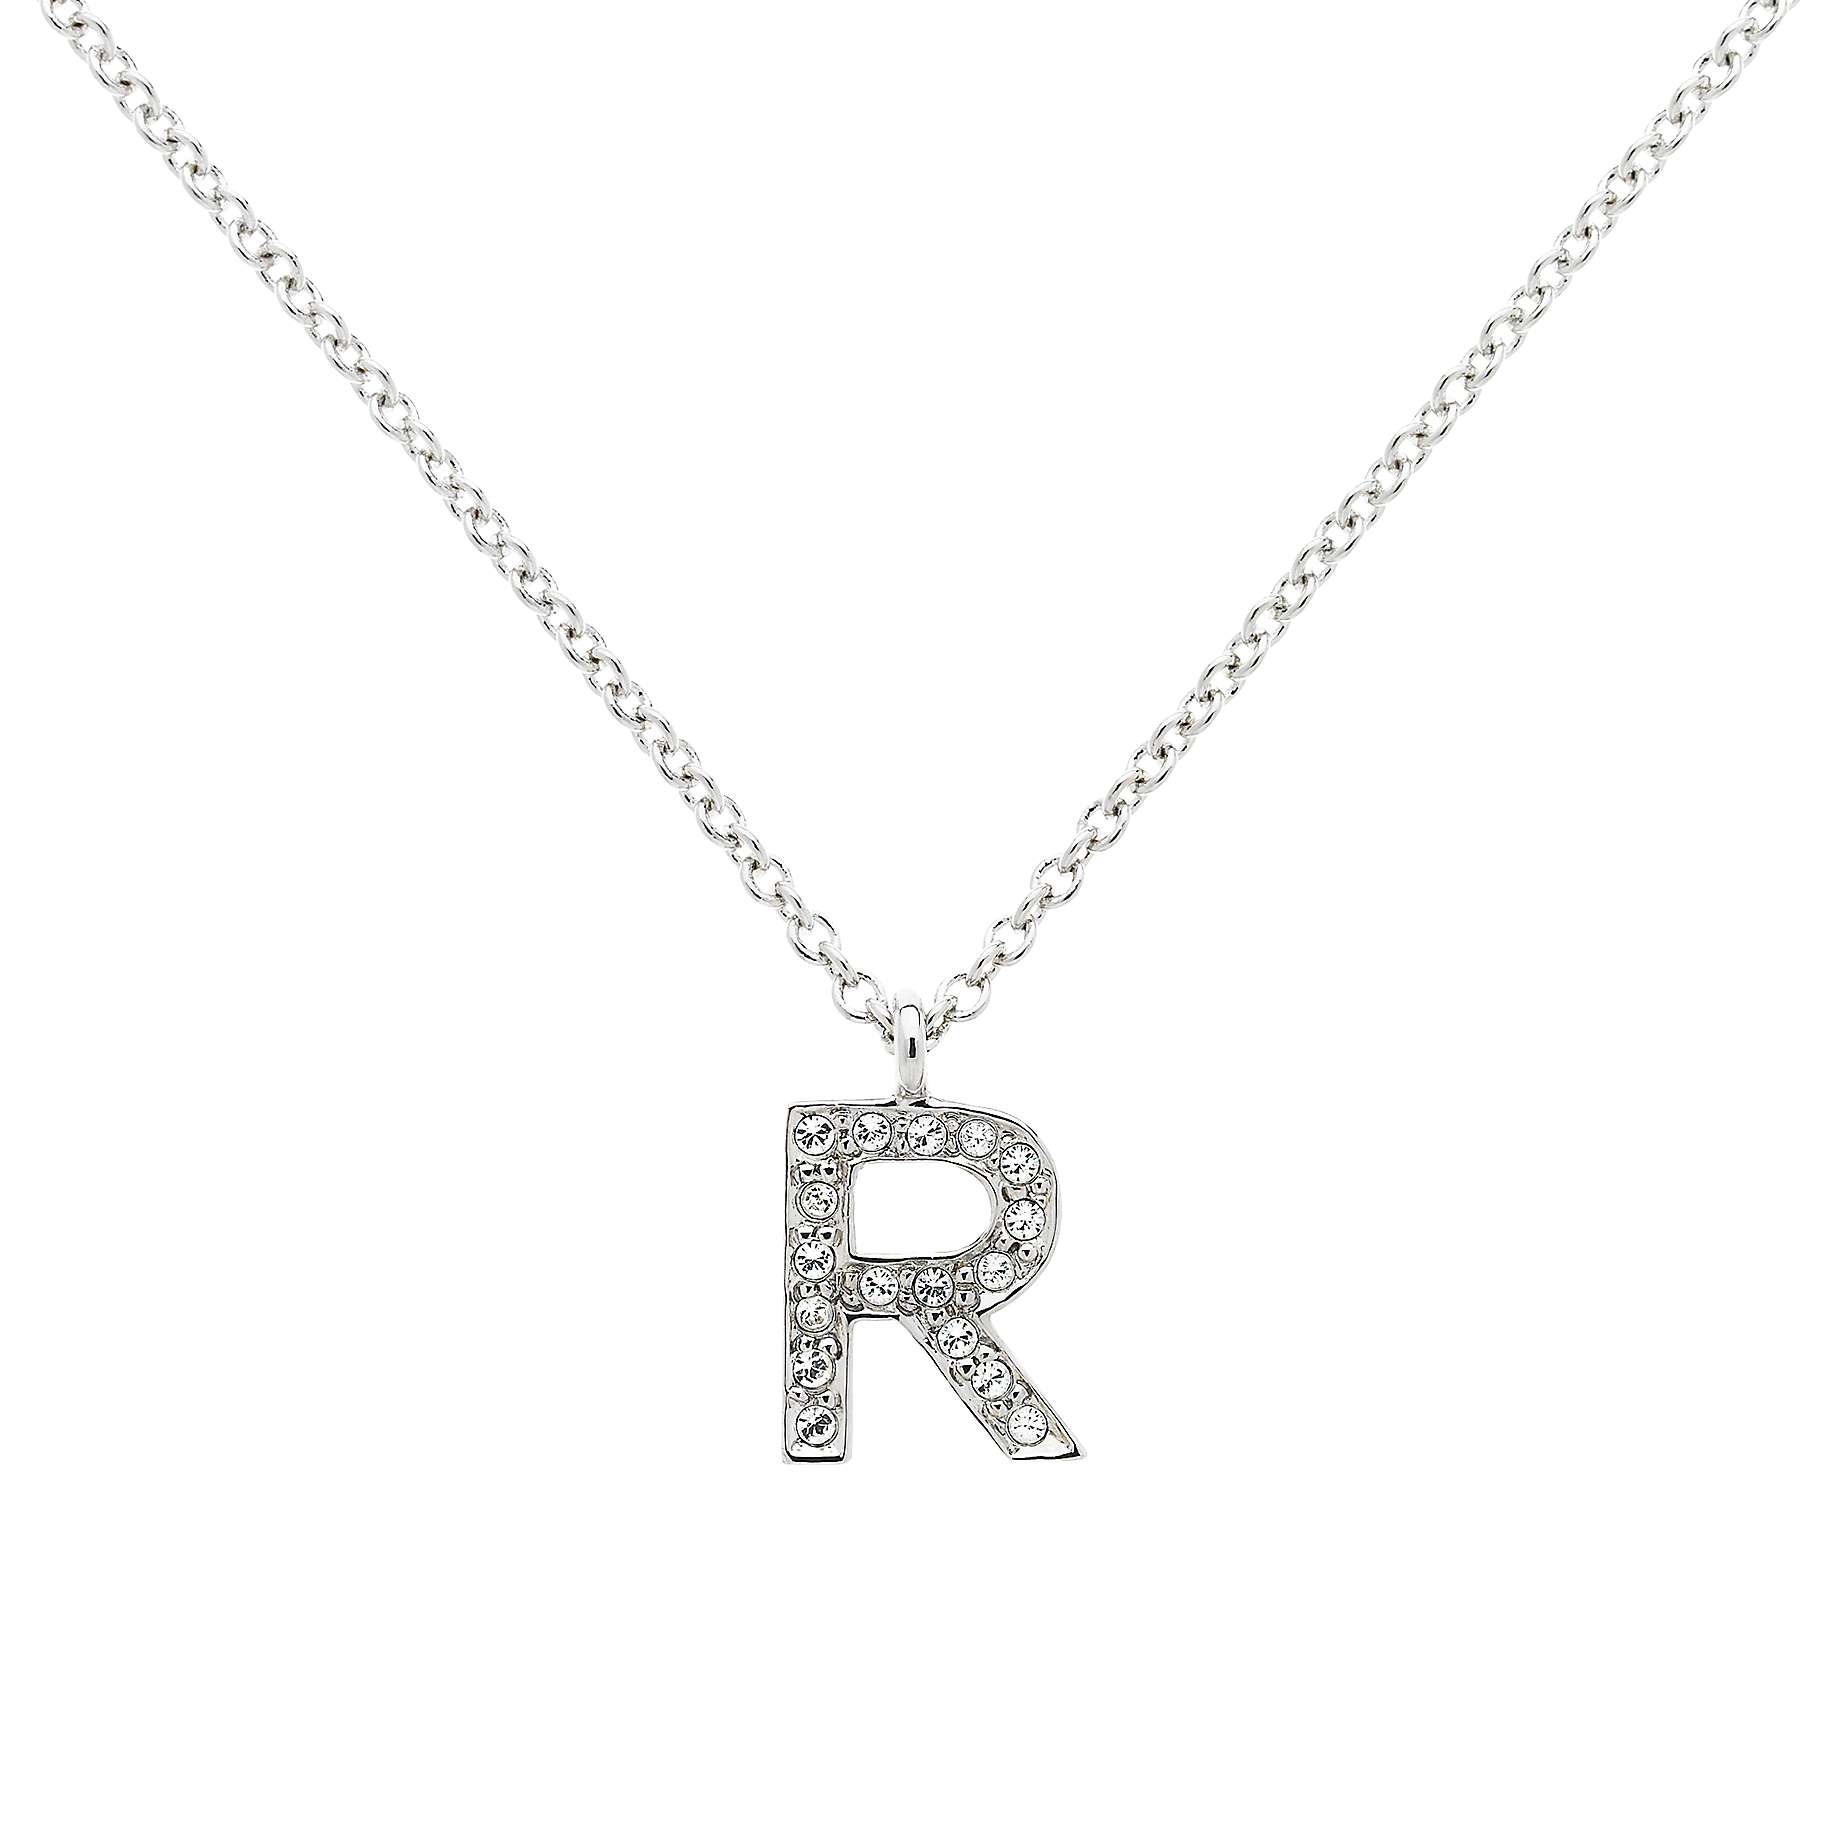 Buy Melissa Odabash Glass Crystal Initial Pendant Necklace, Silver Online at johnlewis.com